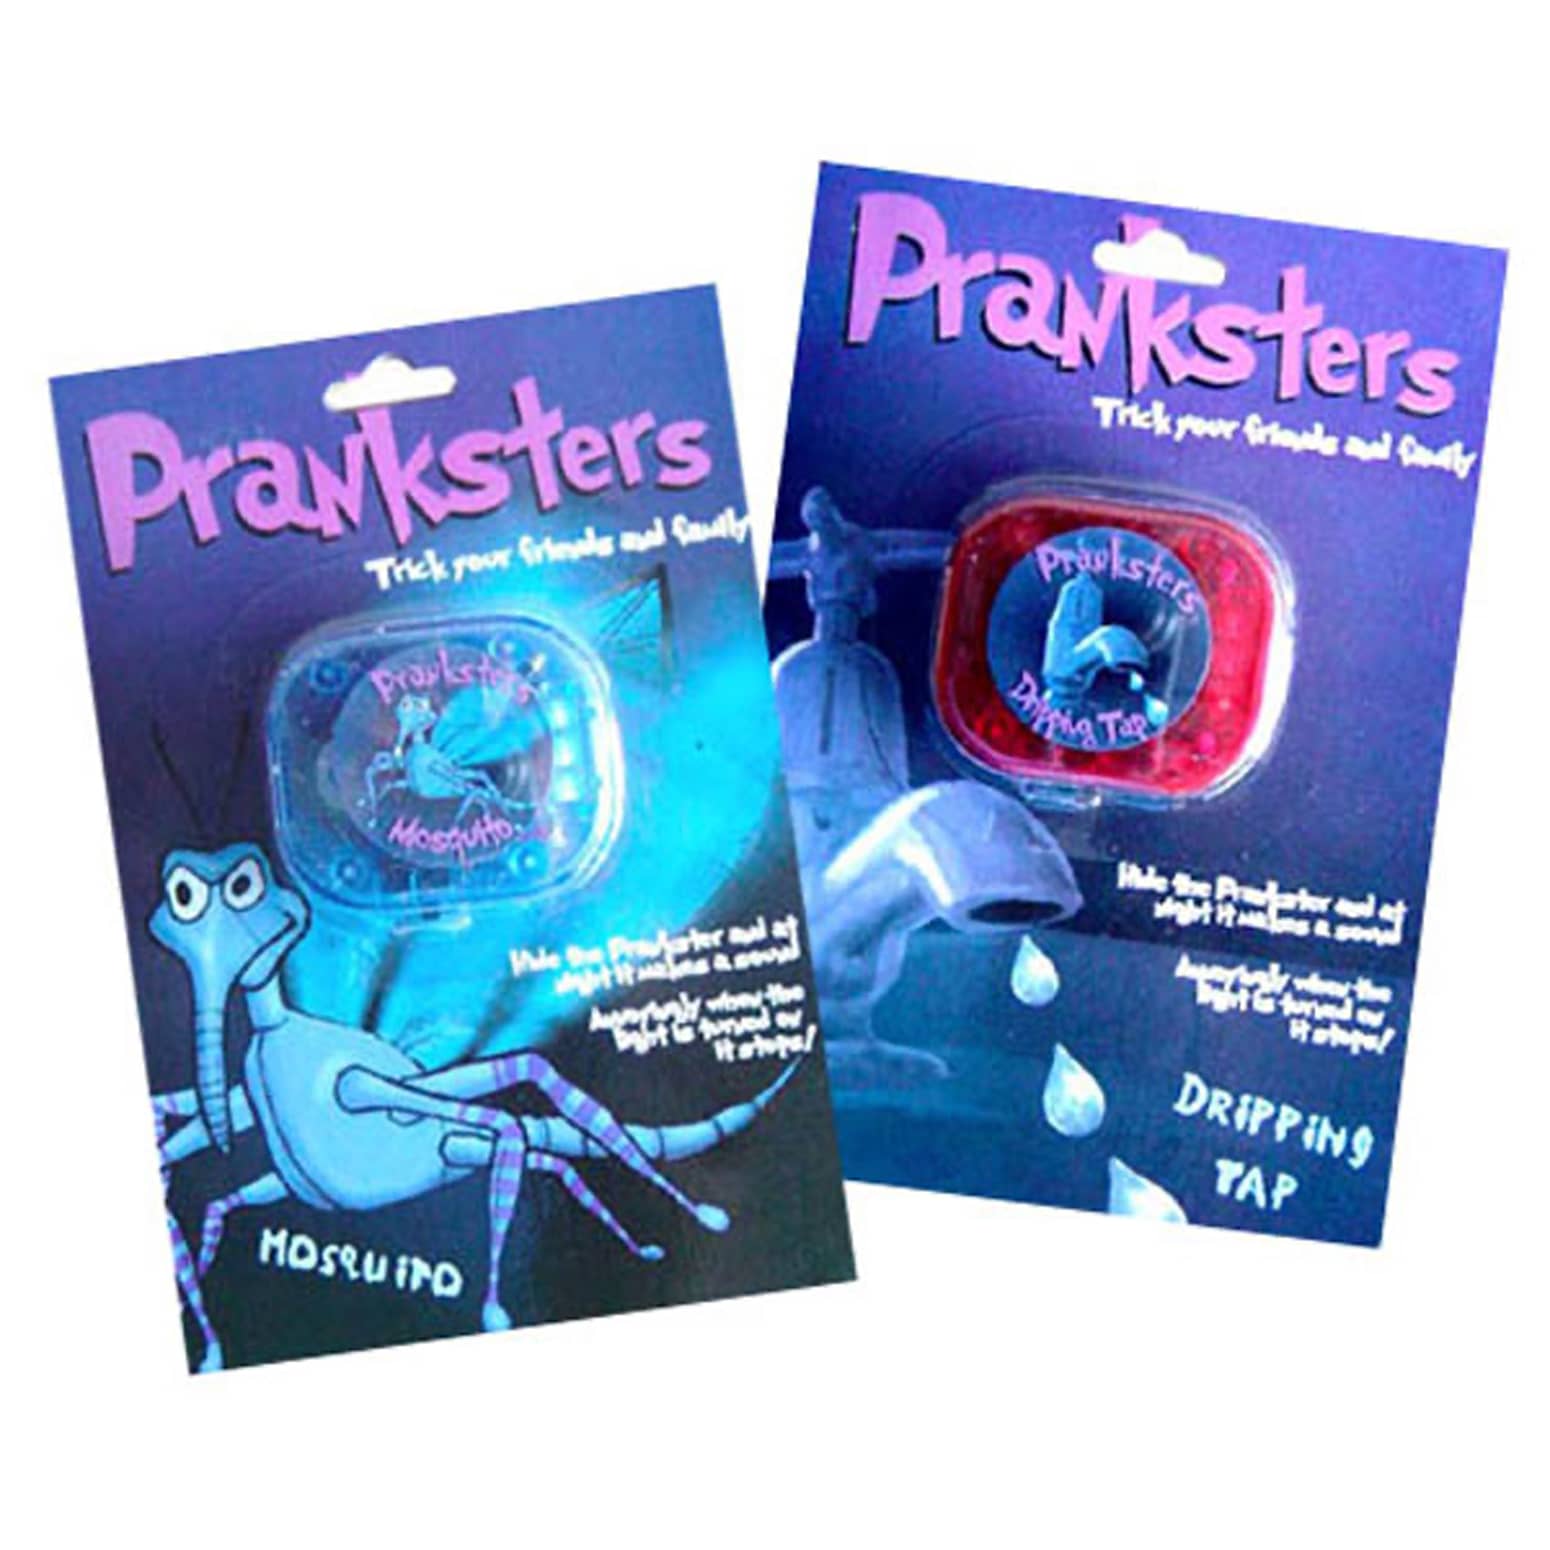 Pranksters - Light-Activated Annoying Sound Device